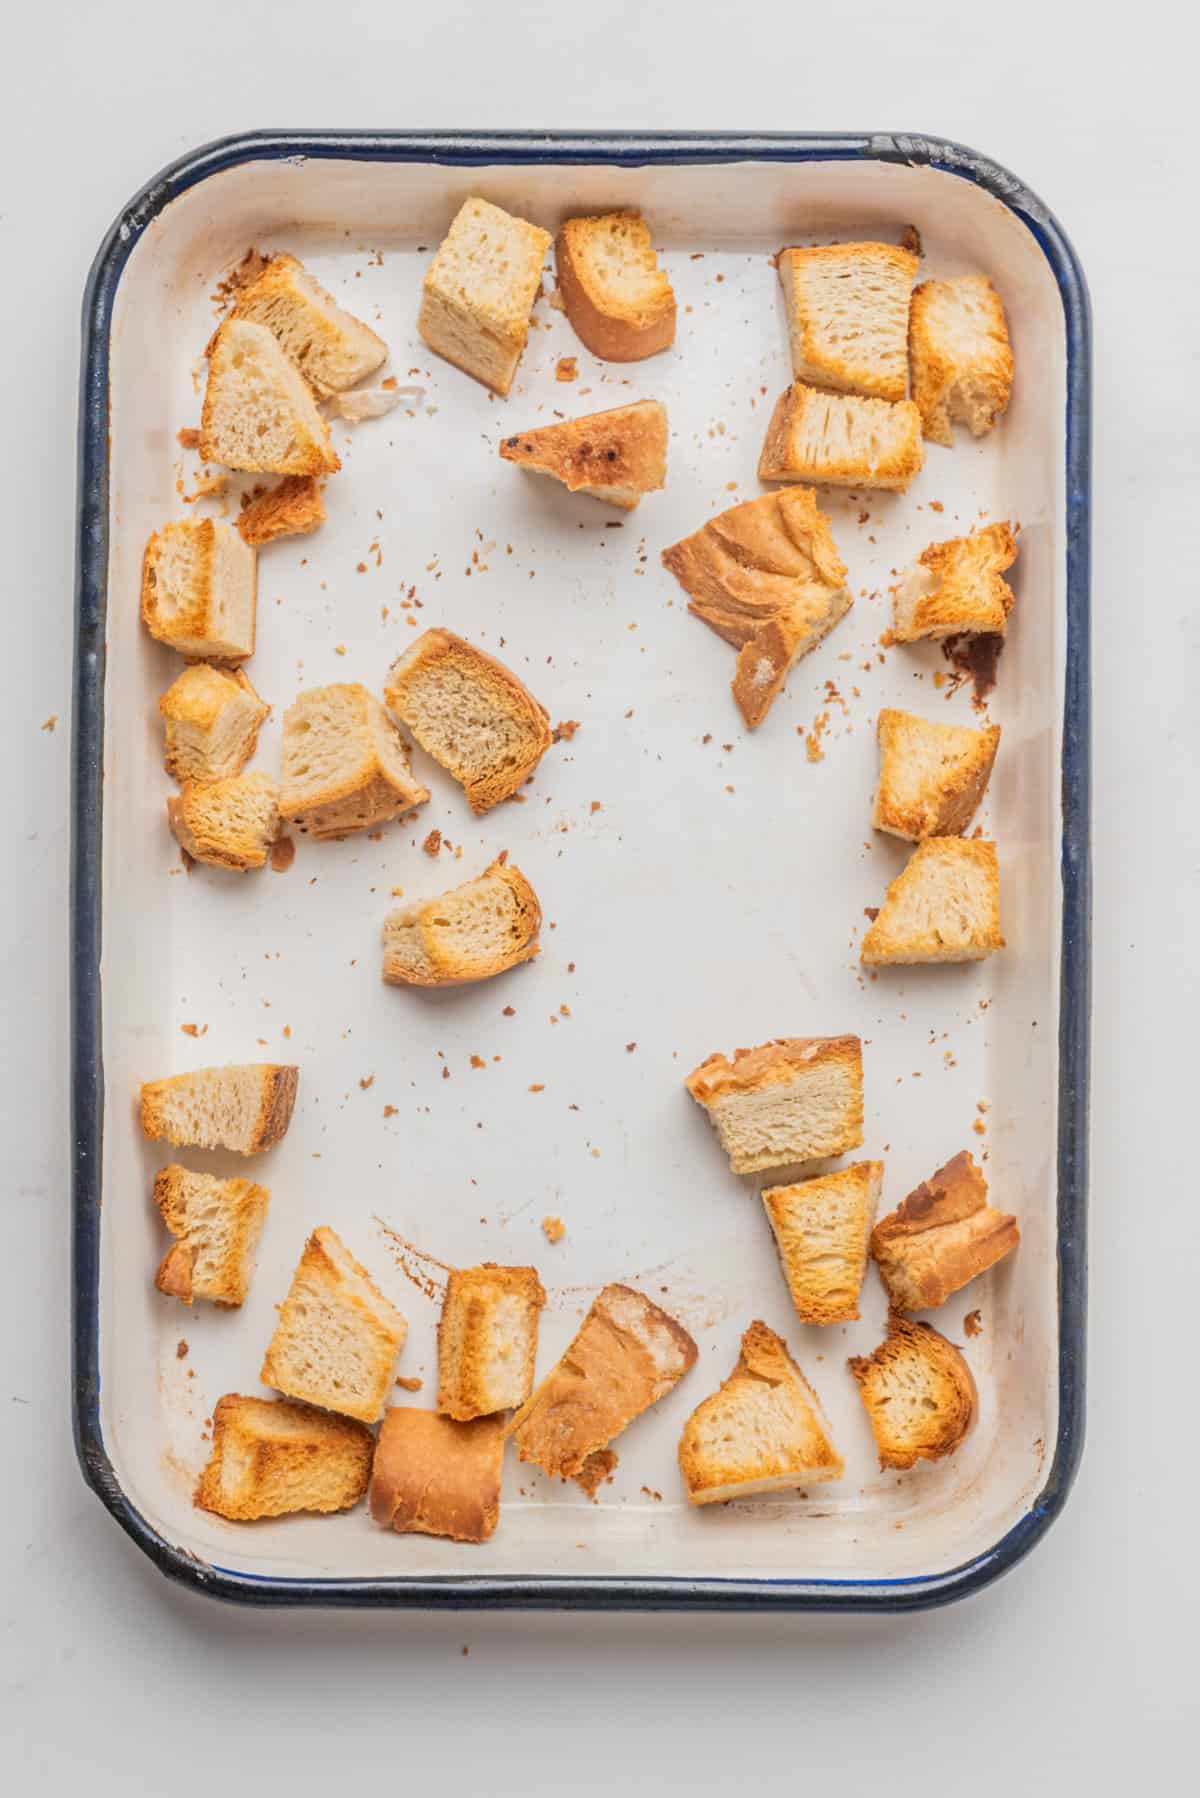 An image of crusty bread on a baking sheet after baking.